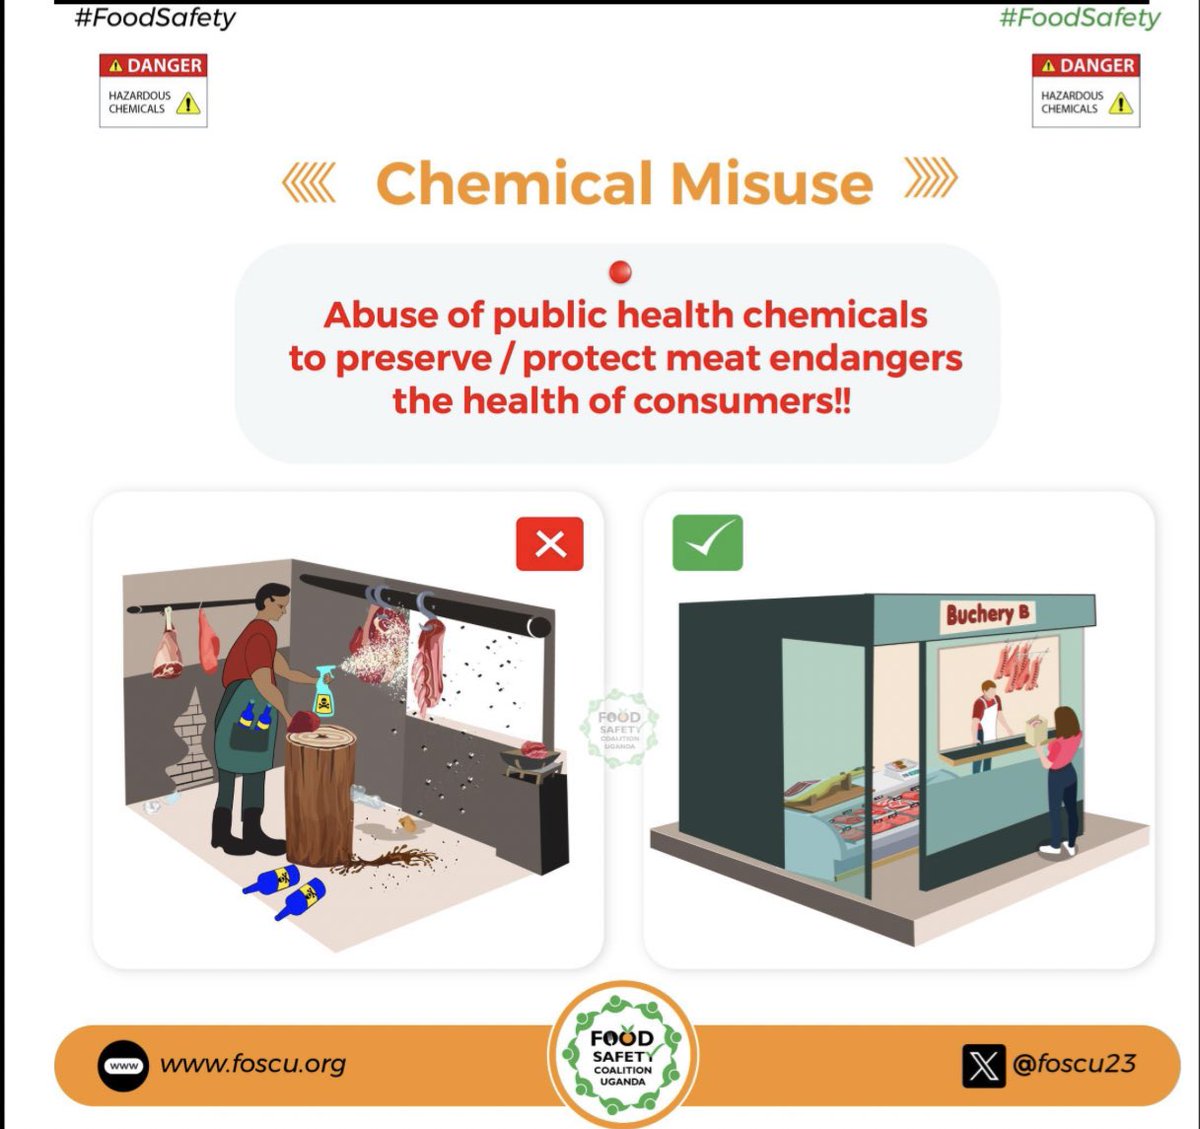 FOOD SAFETY ALERT!! Abuse of chemicals to extend shelf-life and appearance of food e.g. tomatoes and meat is a growing public health concern!! Let’s all be vigilant and play our part!! #FoodSafety | @foscu23